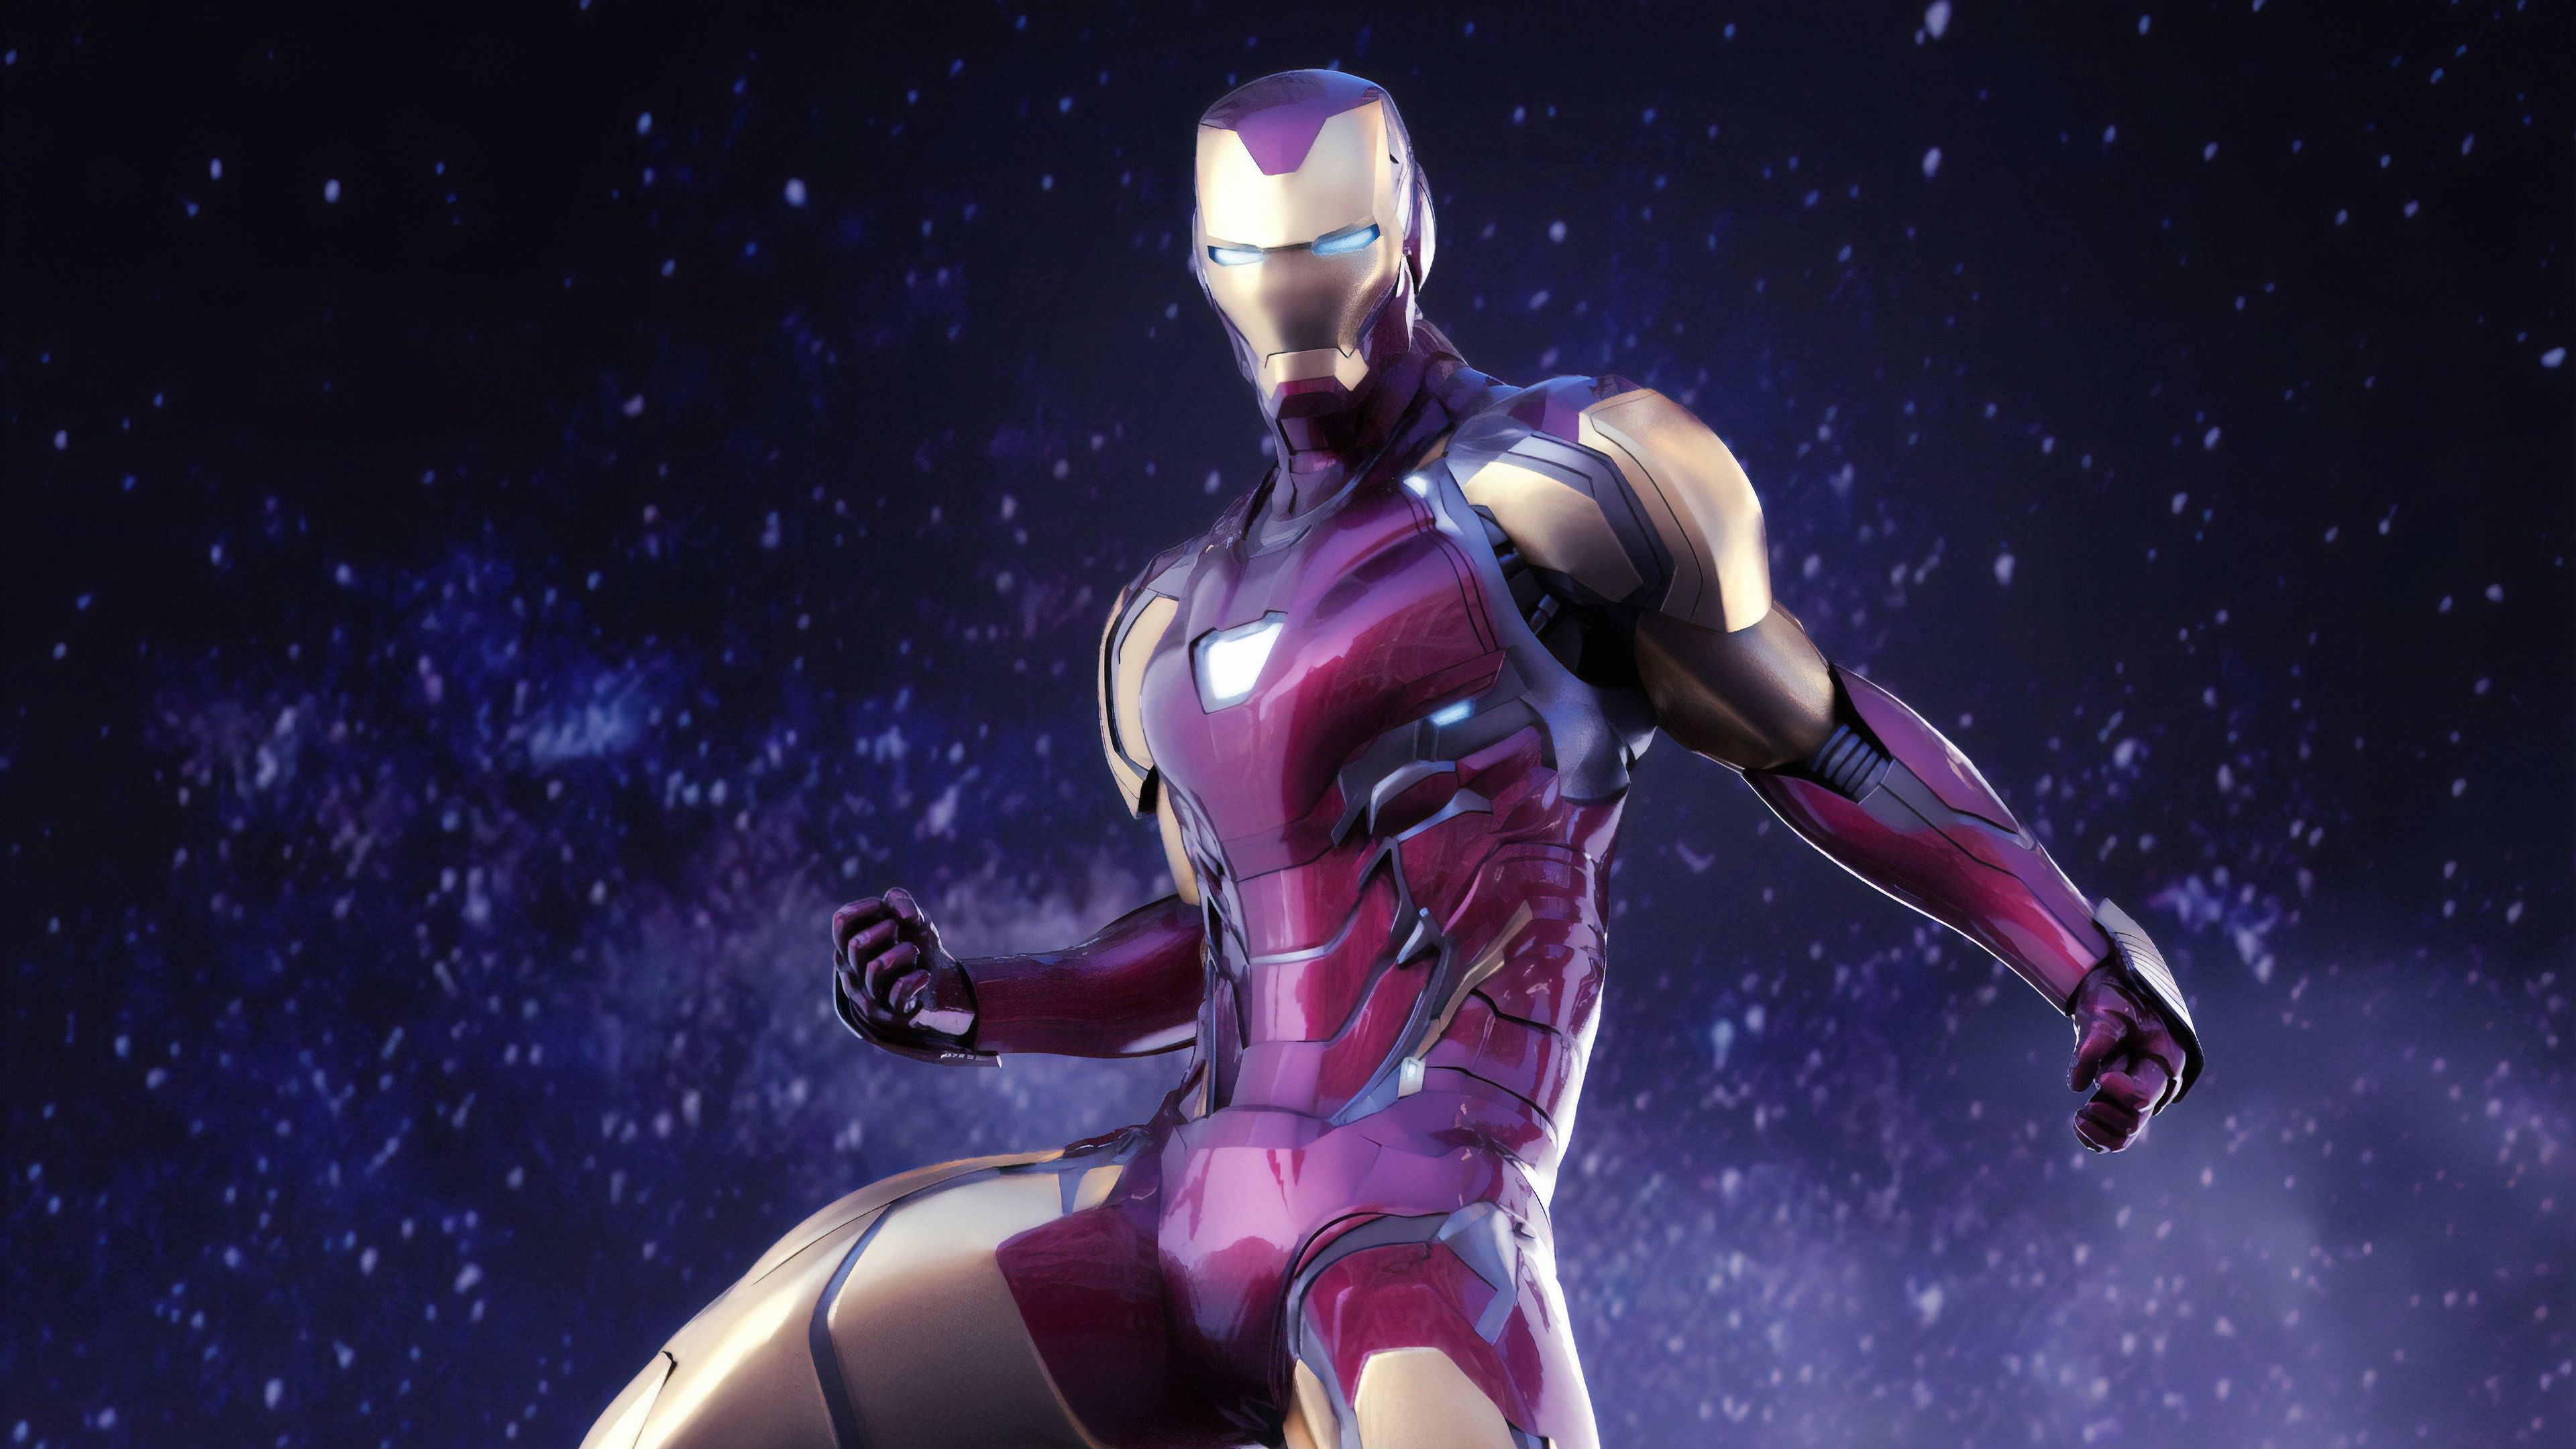 Iron Man Avengers Endgame Suit 4k, HD Superheroes, 4k Wallpaper, Image, Background, Photo and Picture